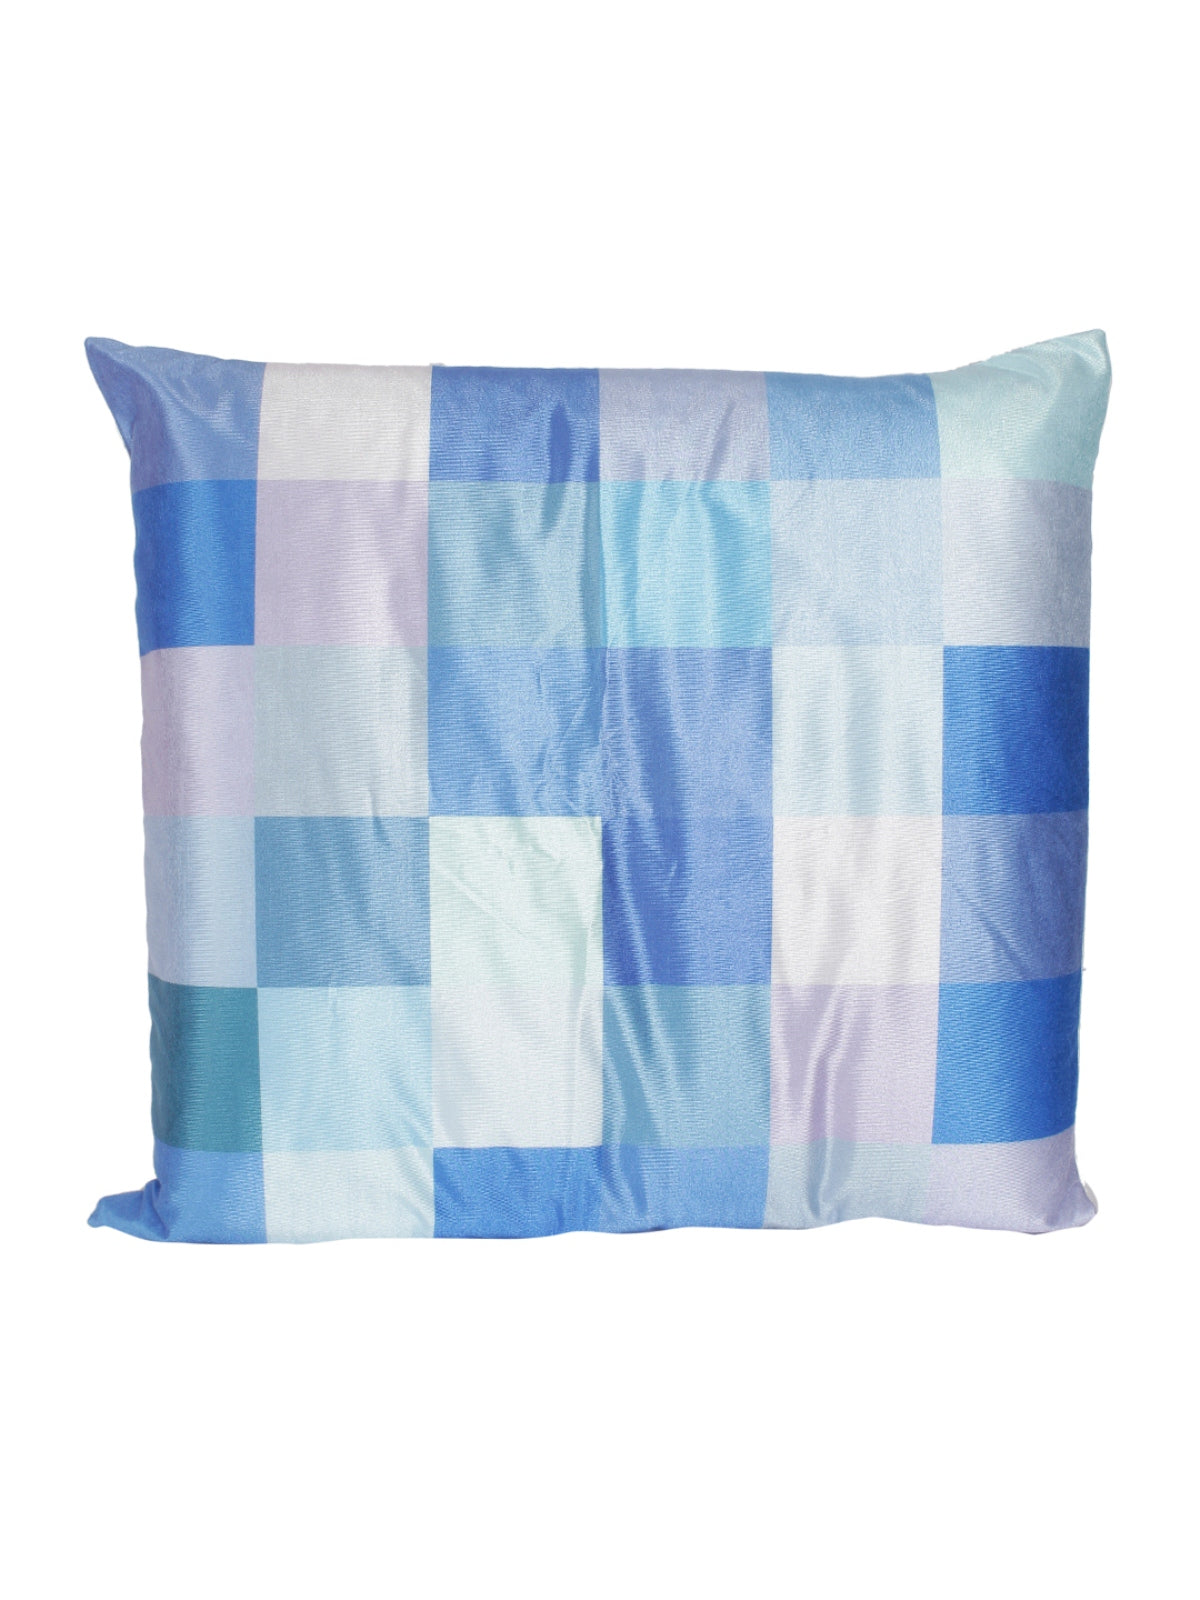 Blue and White Set of 2 Cushion Covers 24x24 Inch